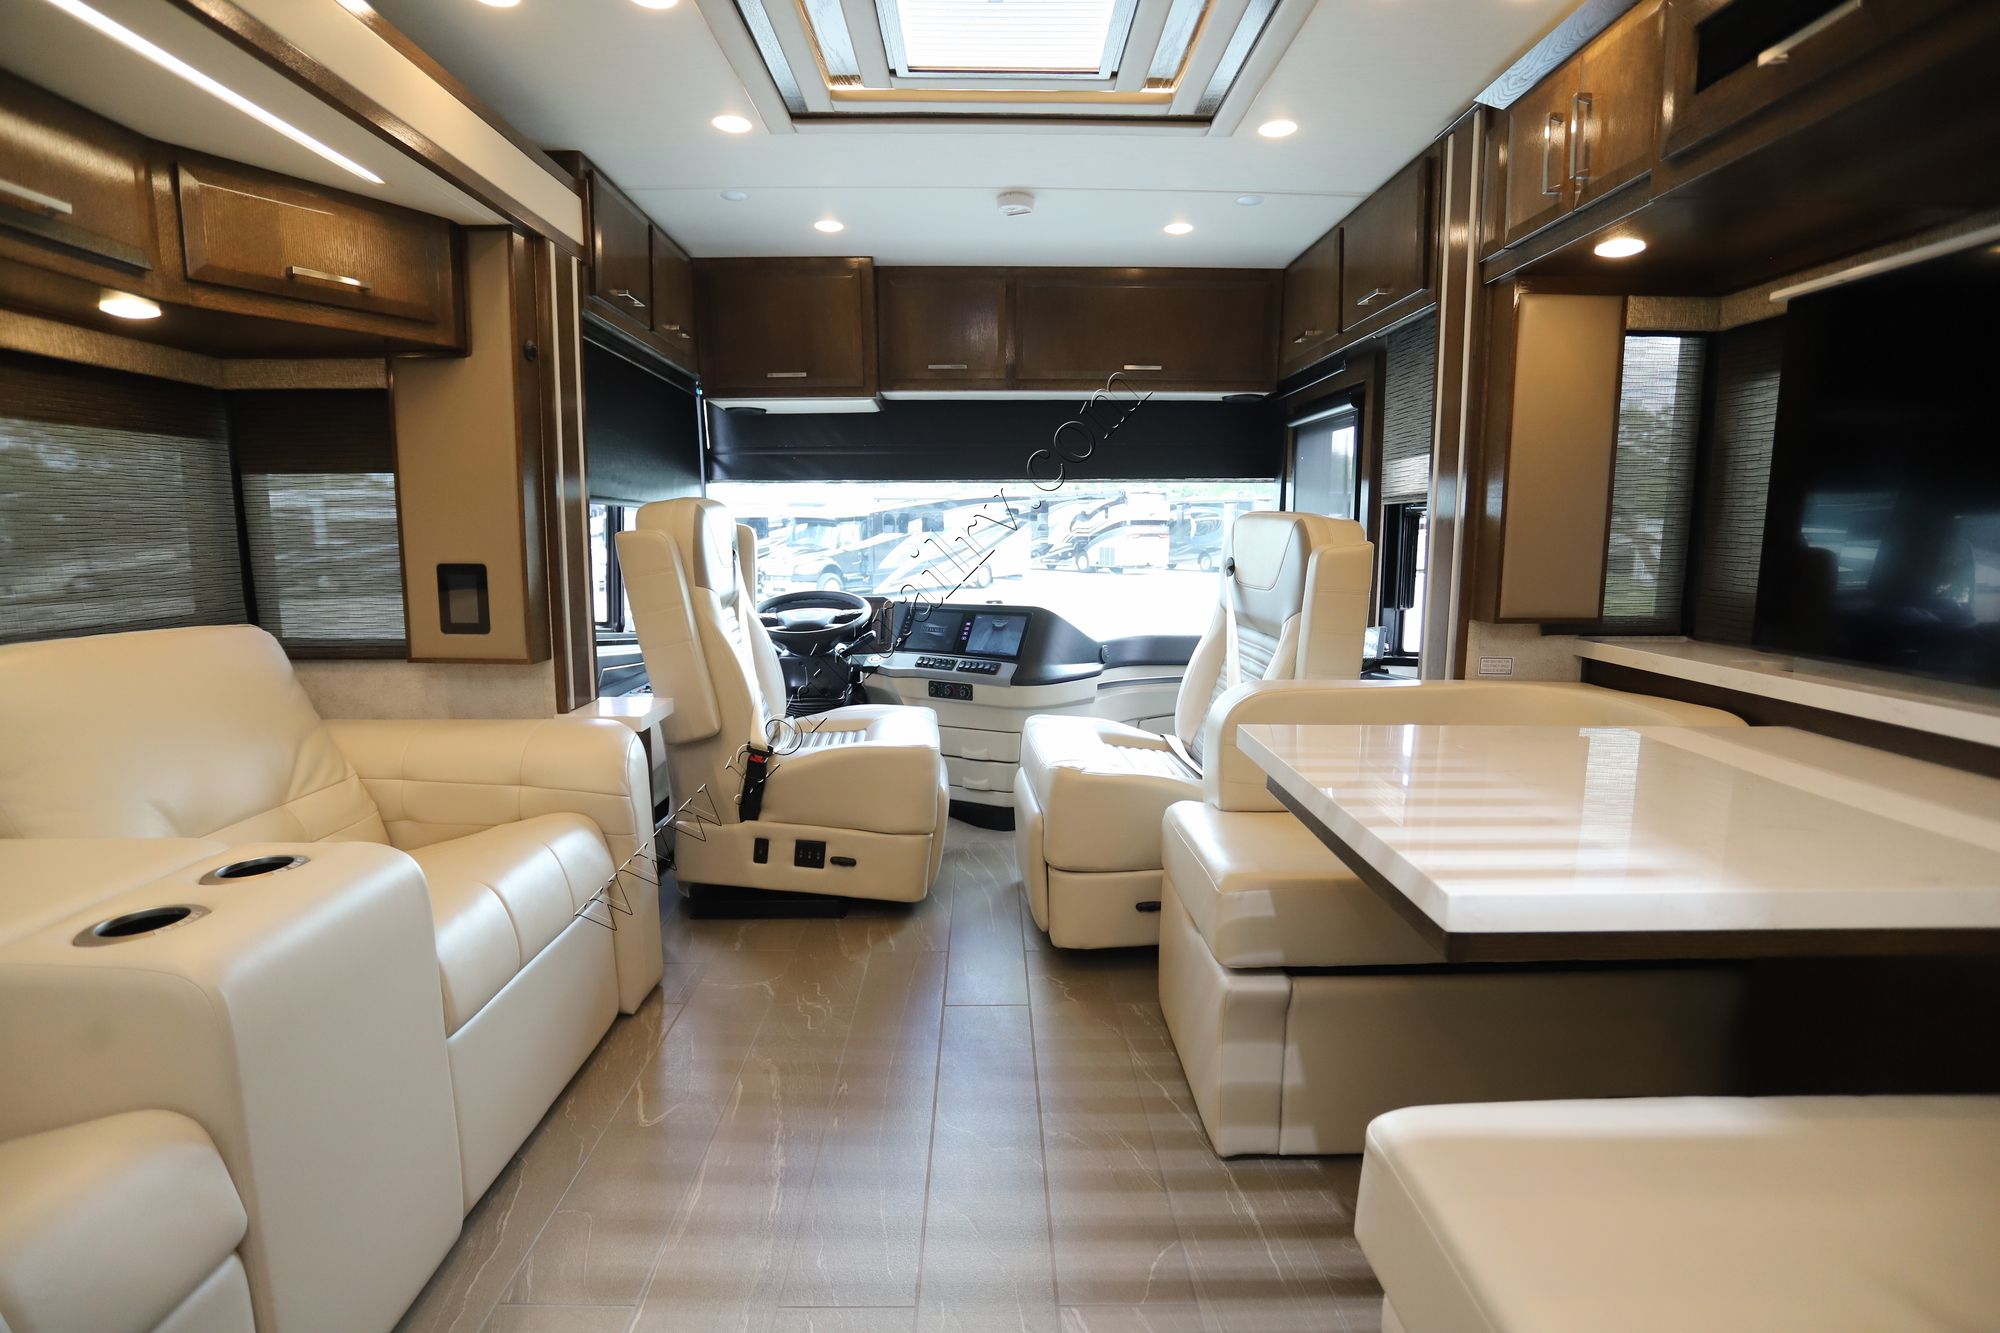 Used 2024 Newmar New Aire 3543 Class A  For Sale